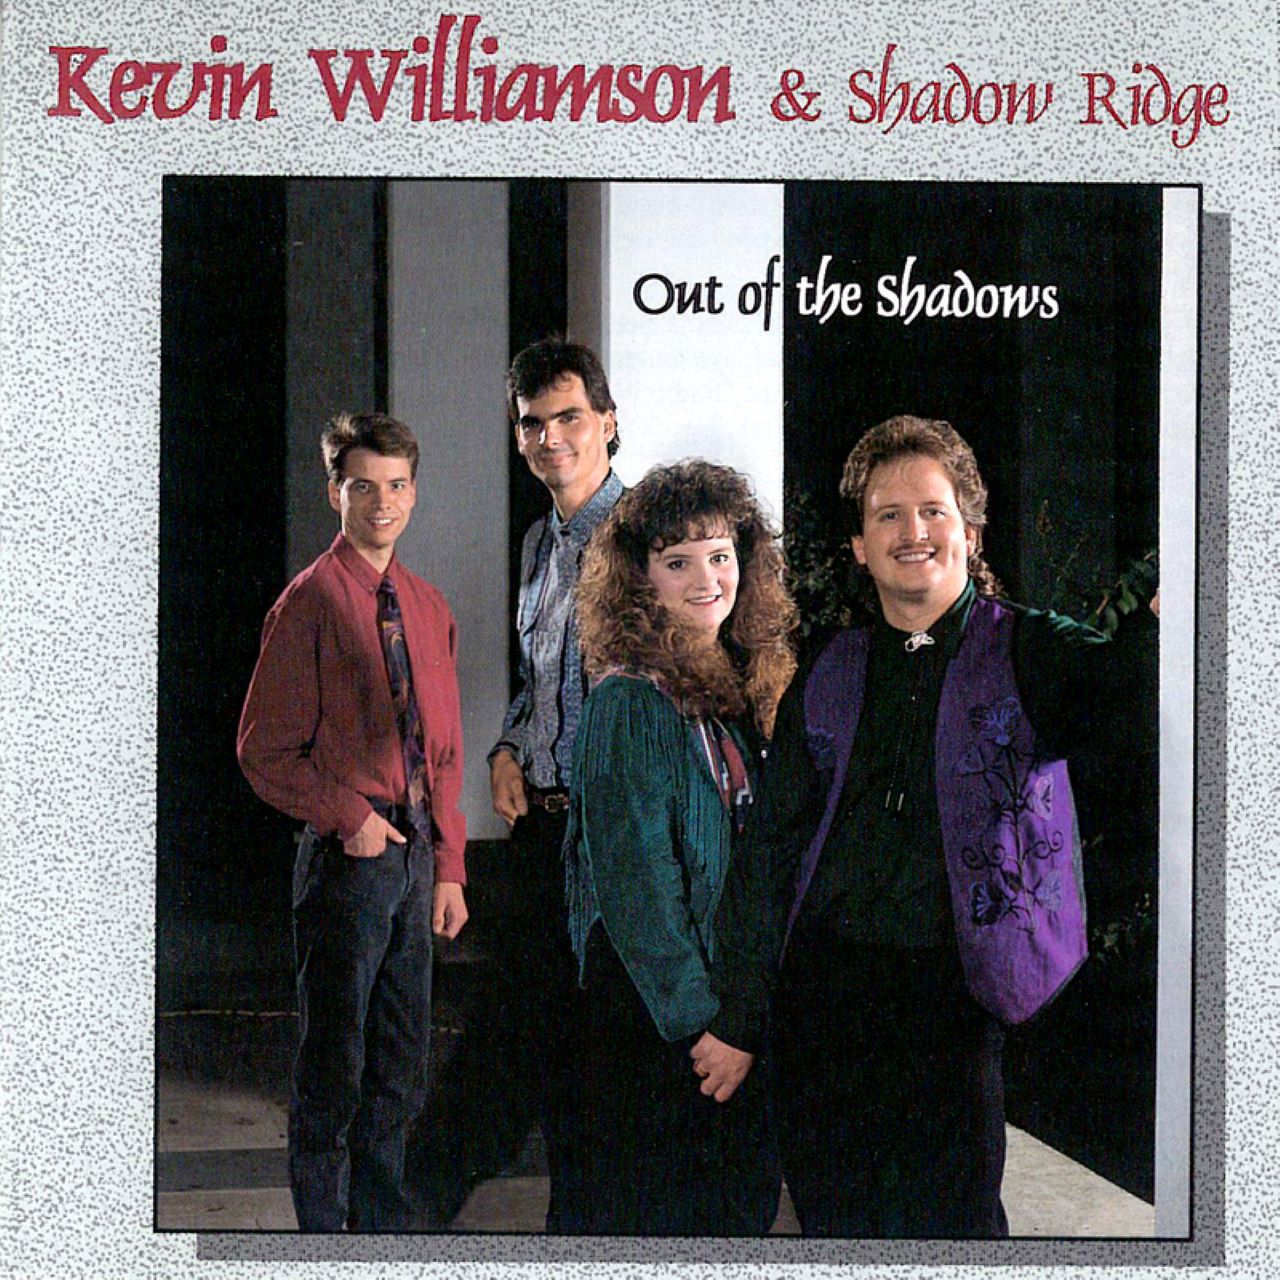 Kevin Williamson & Shadow Ridge – Out Of The Shadows cover album